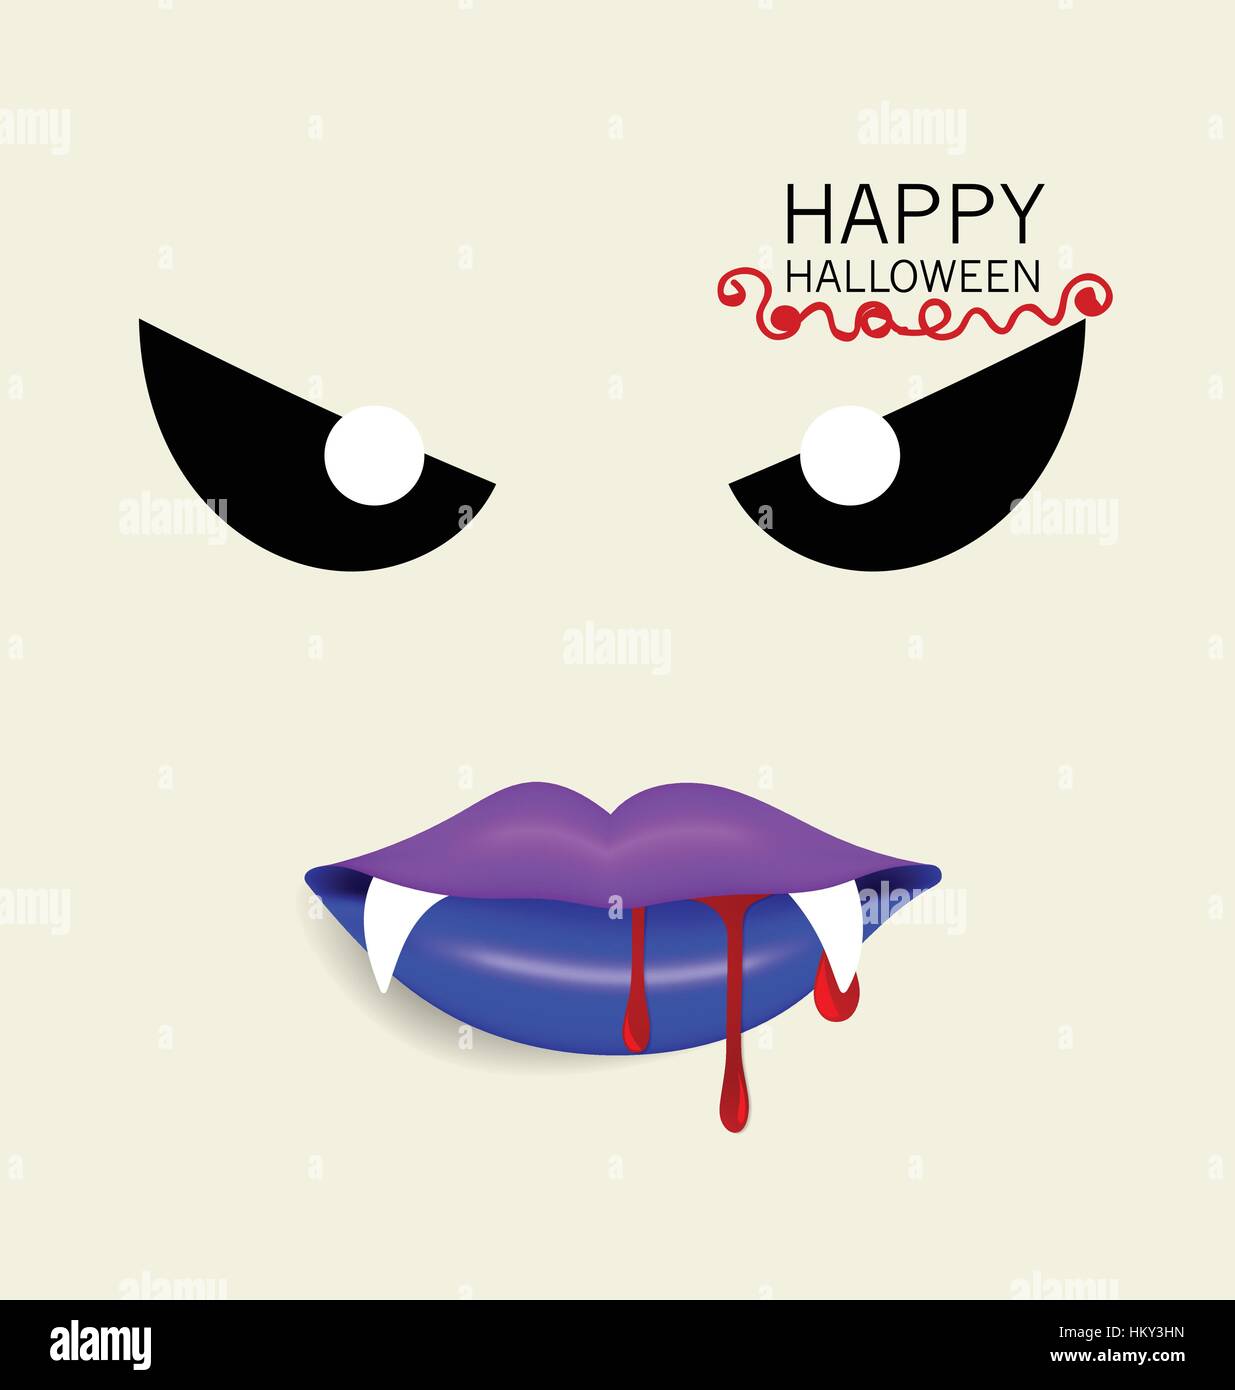 Happy Halloween design background with vampire mouth. Vector illustration. Stock Vector